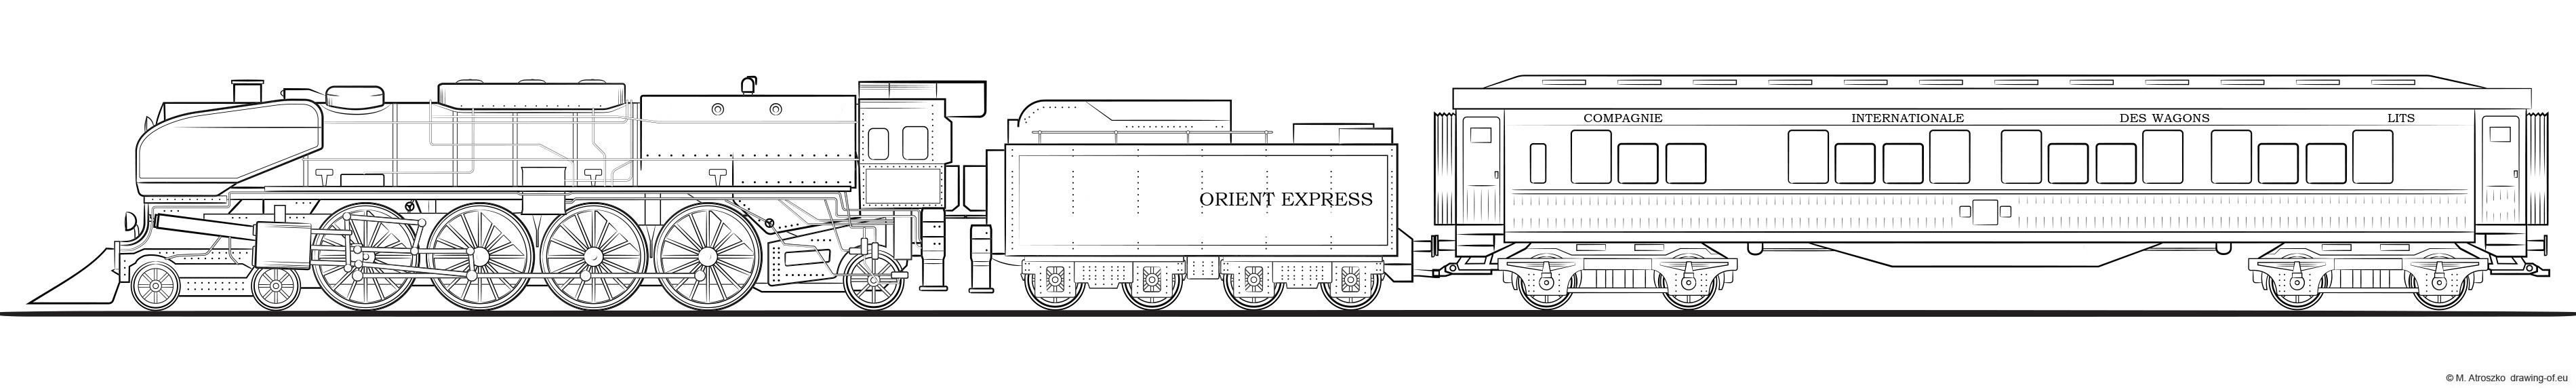 Orient express train drawing